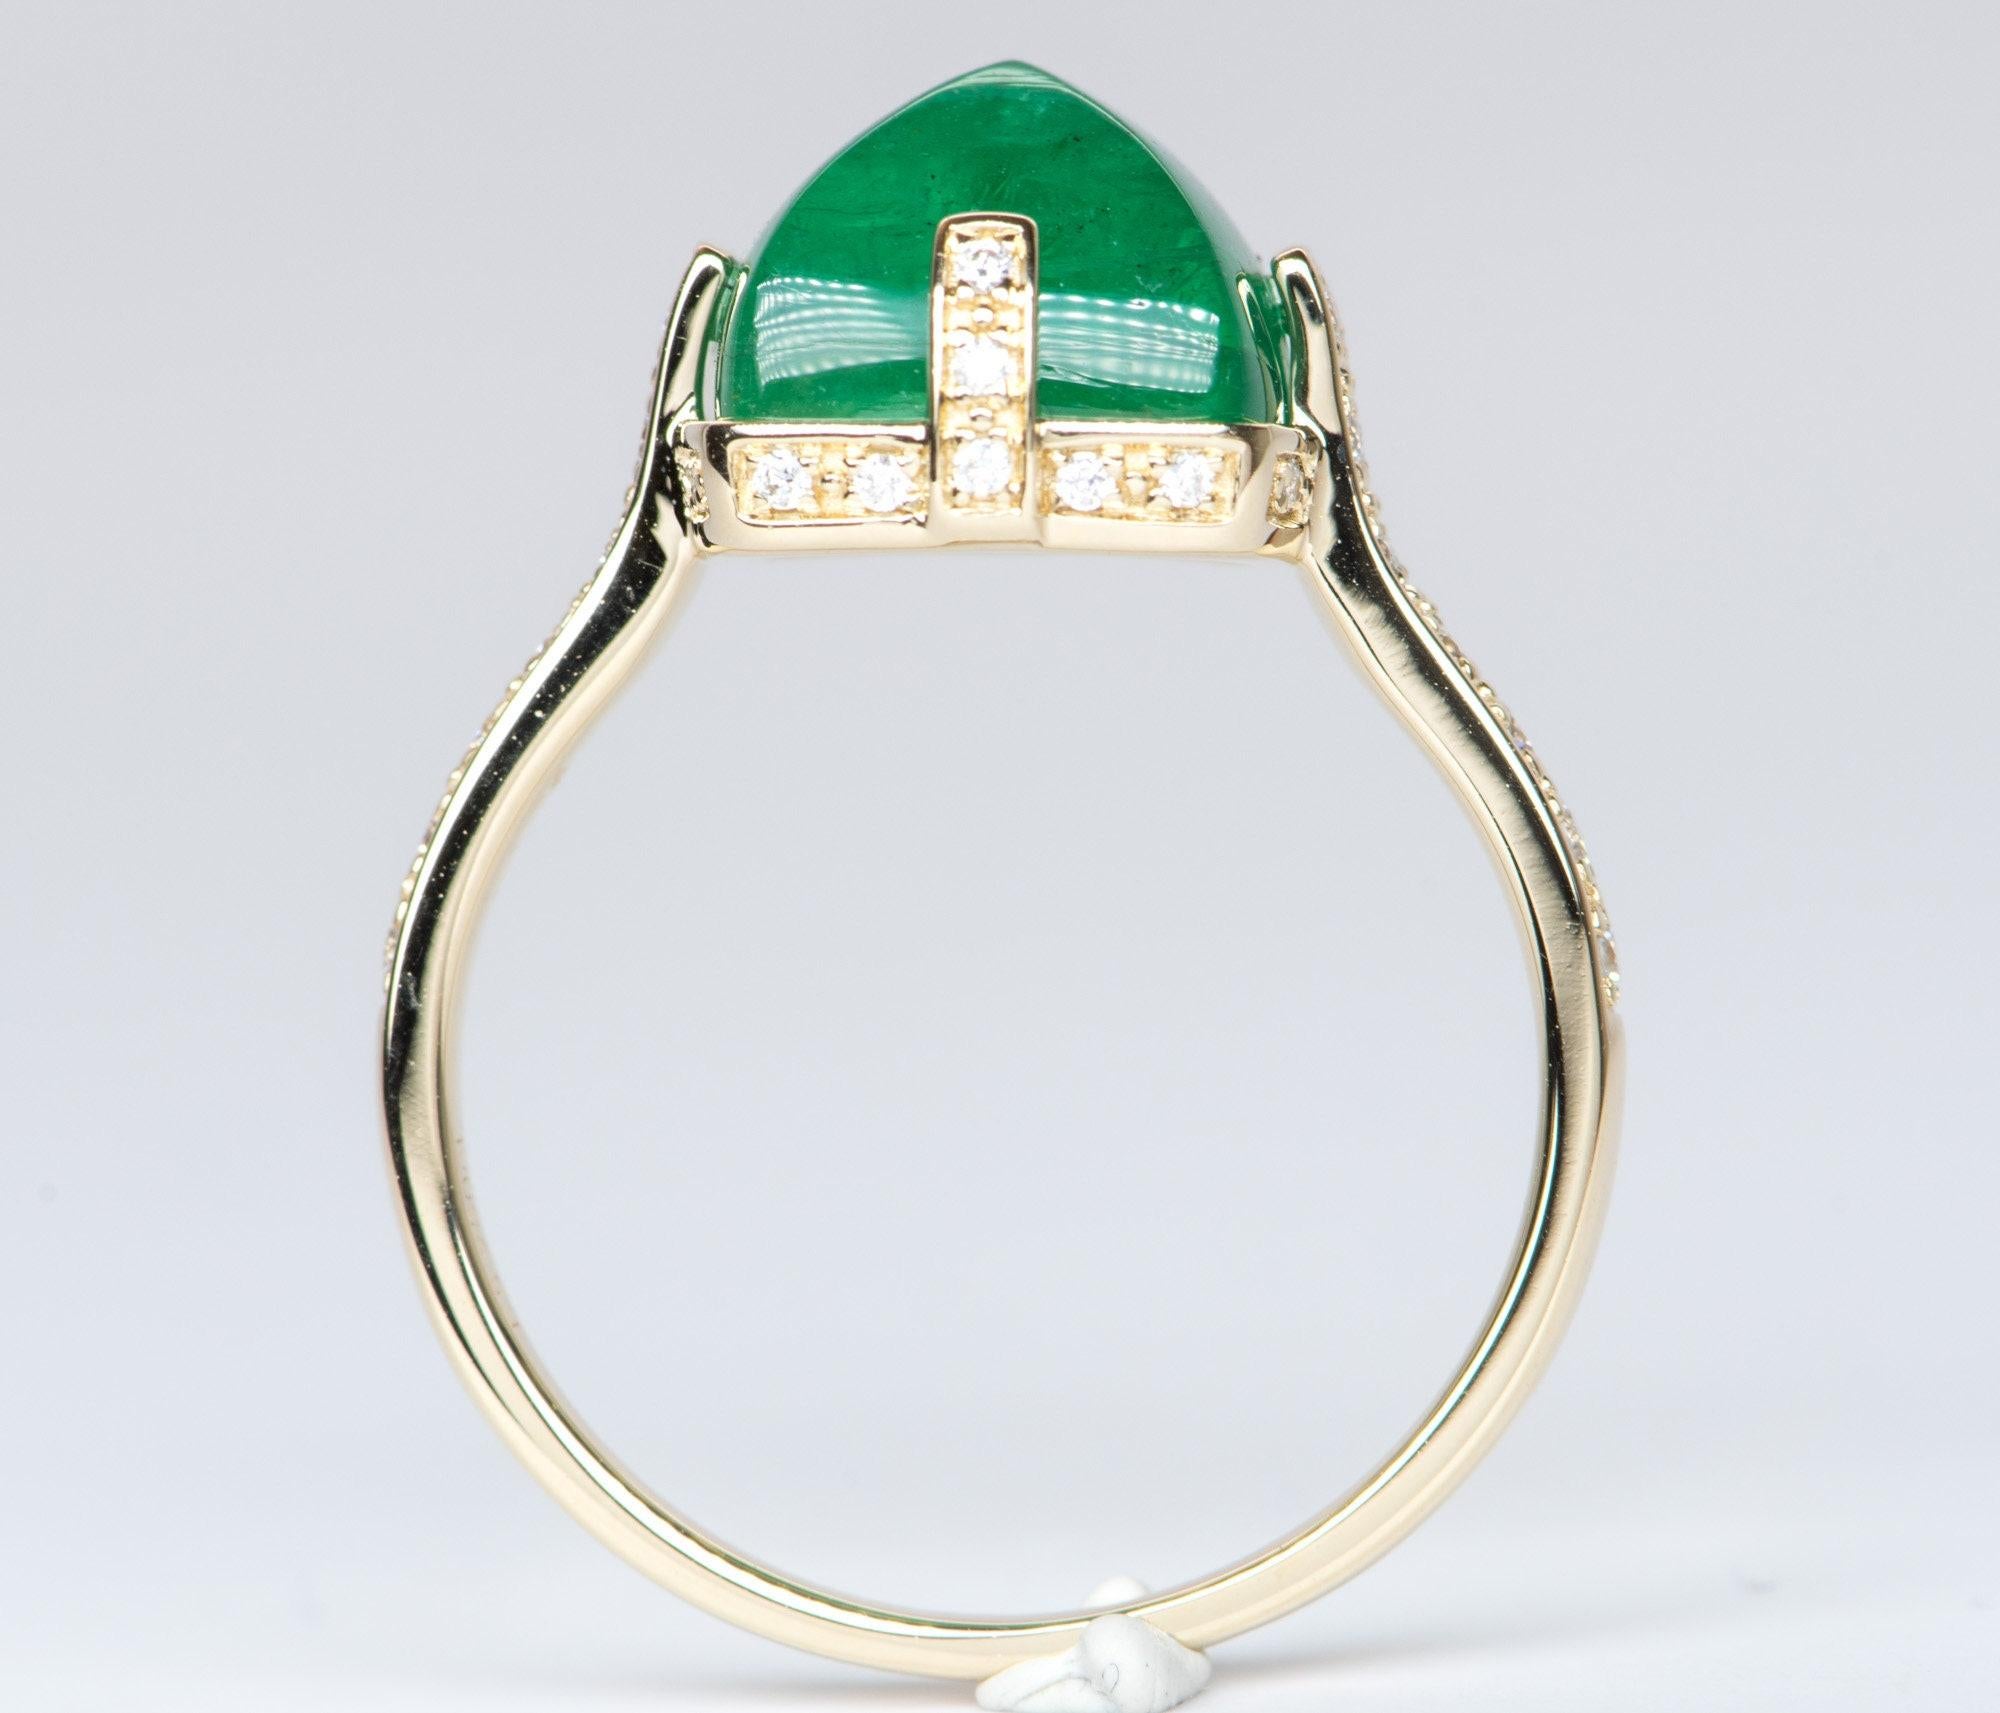 Emerald Cut 5.24ct Sugarloaf Emerald with Diamond Prongs Pave Band 14K Gold Statement Ring For Sale